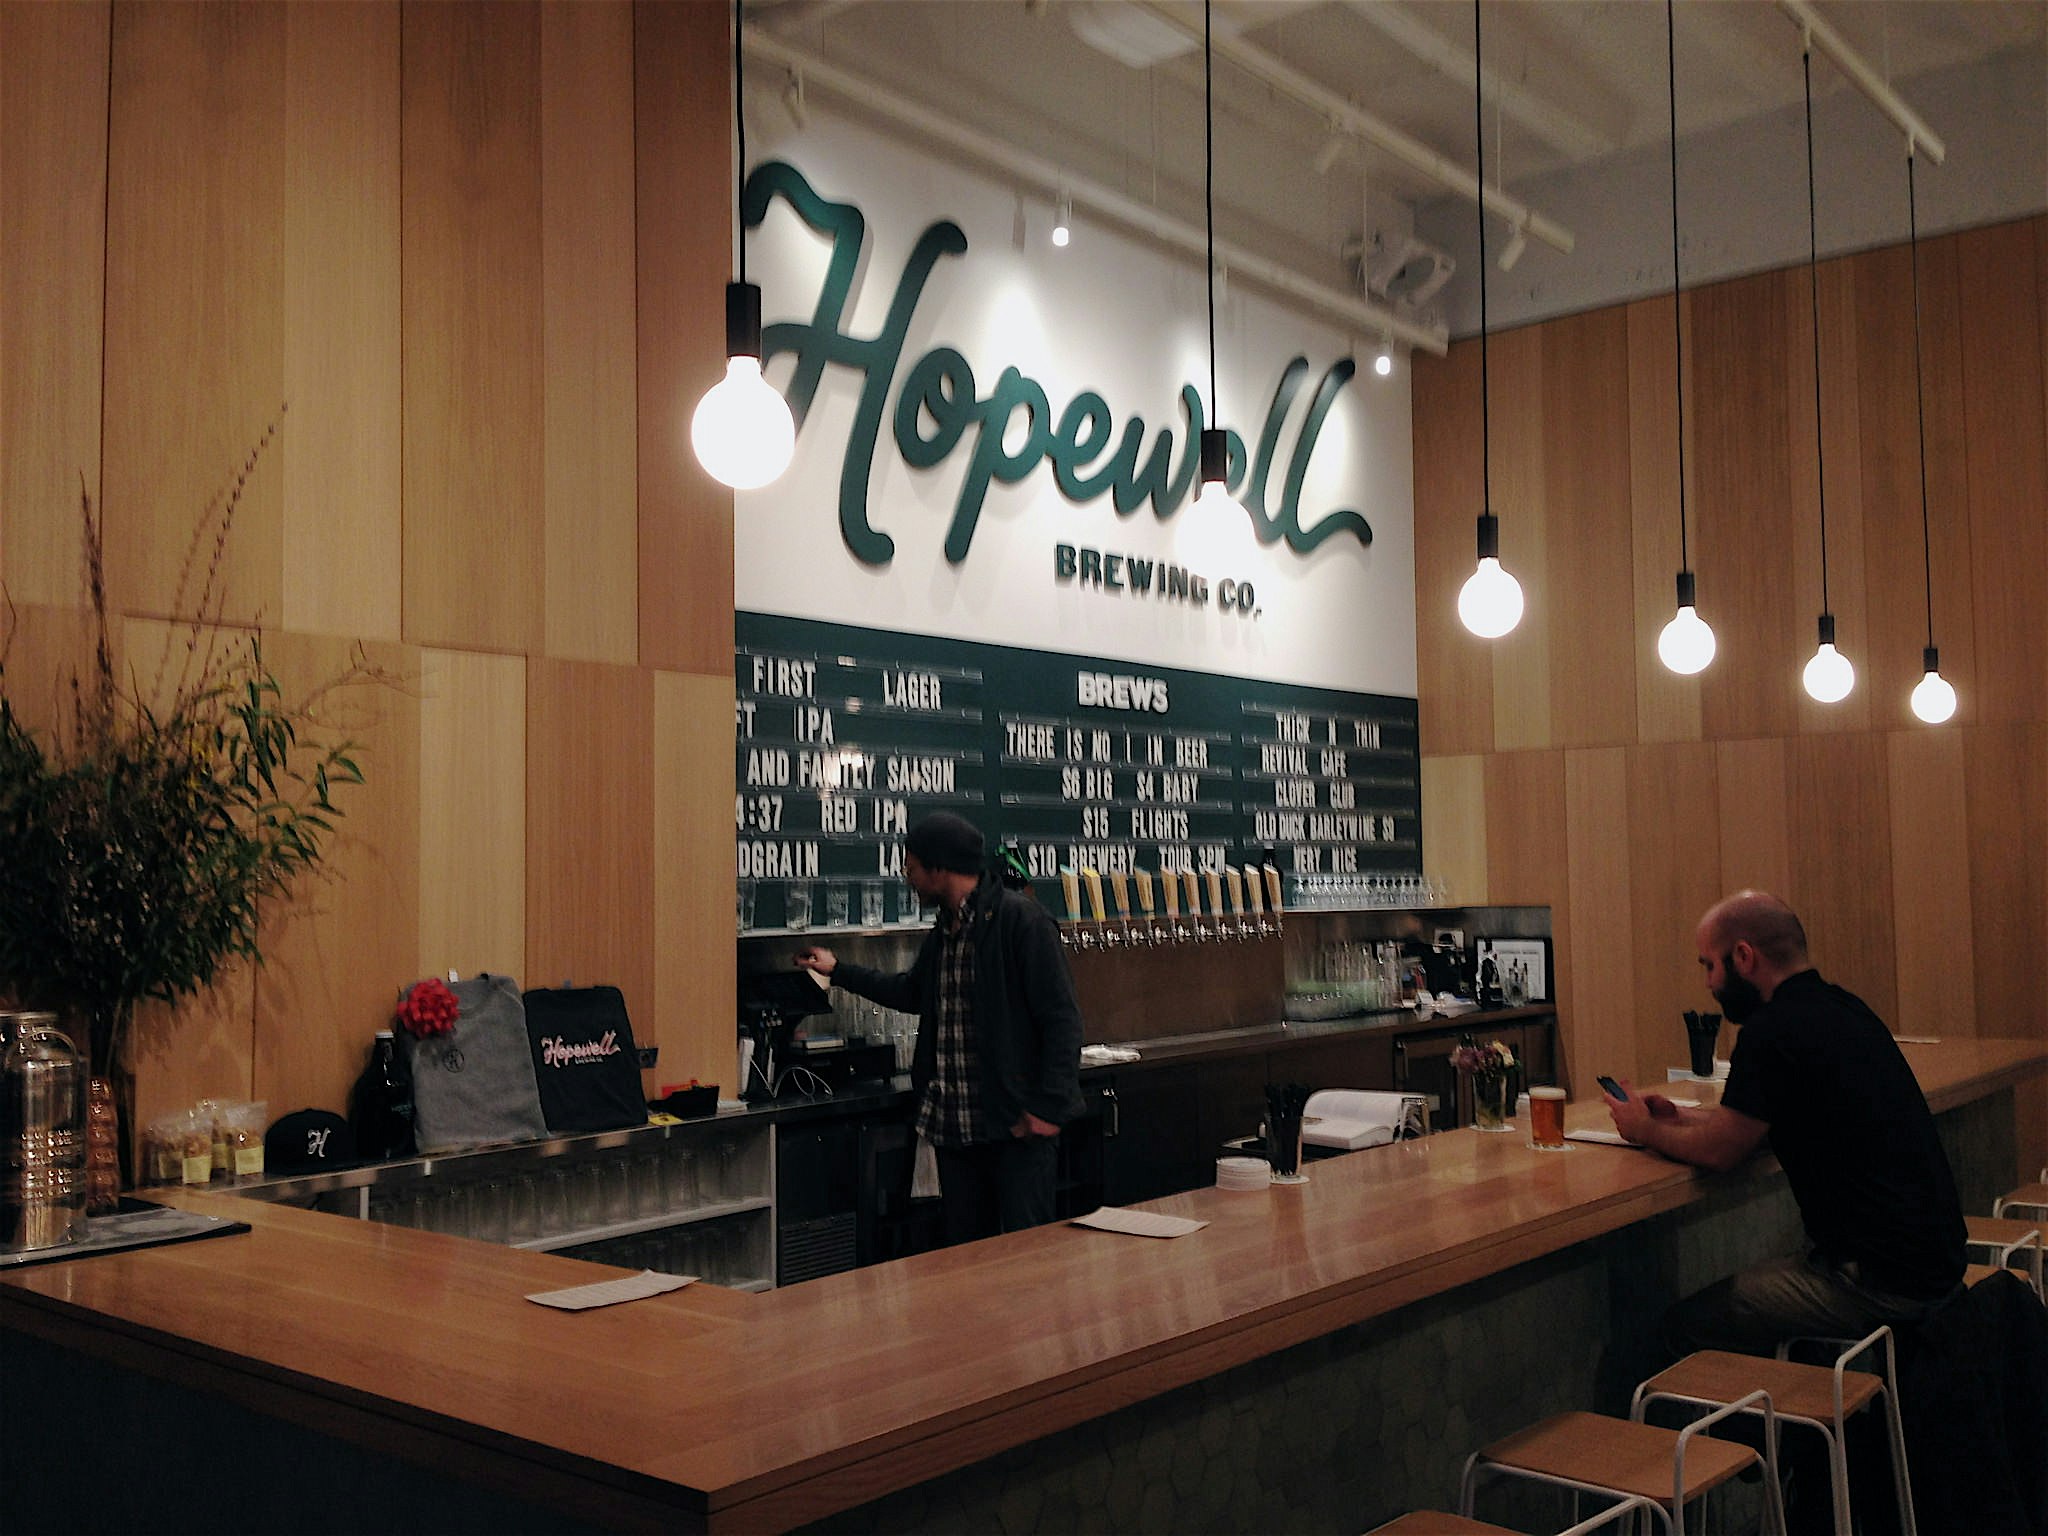 Hopewell Brewing Company, based in Chicago's fast-growing Logan Square neighborhood, produces bright, clean beers served in a bright, clean taproom.